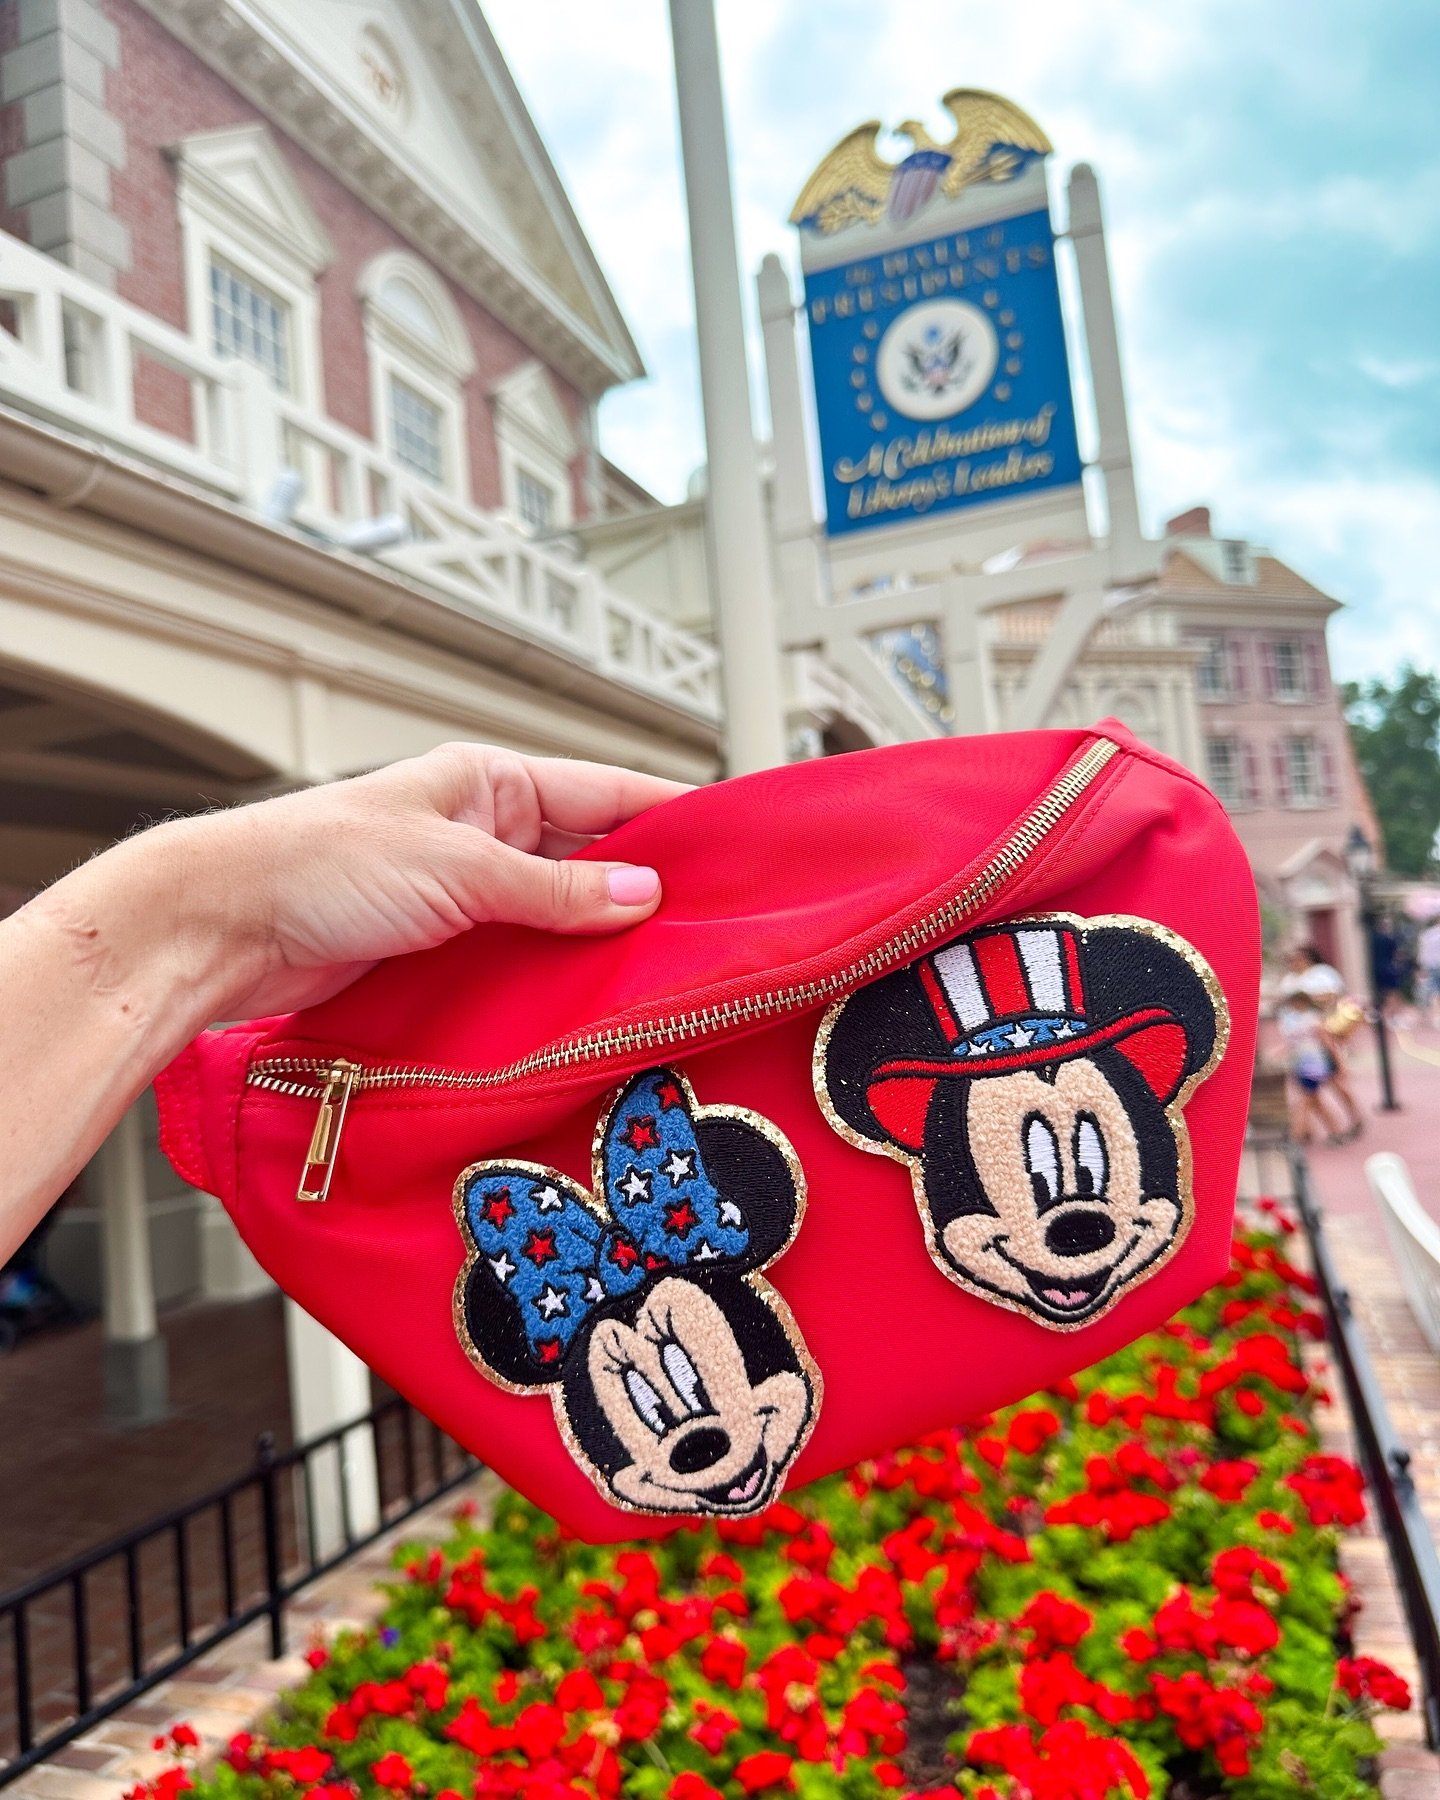 Get Memorial Day and Fourth of July ready with this patriotic Mickey and Minnie bag! Available now. Plus shop several other patriotic bag, patch and shirt options also available in the shop.